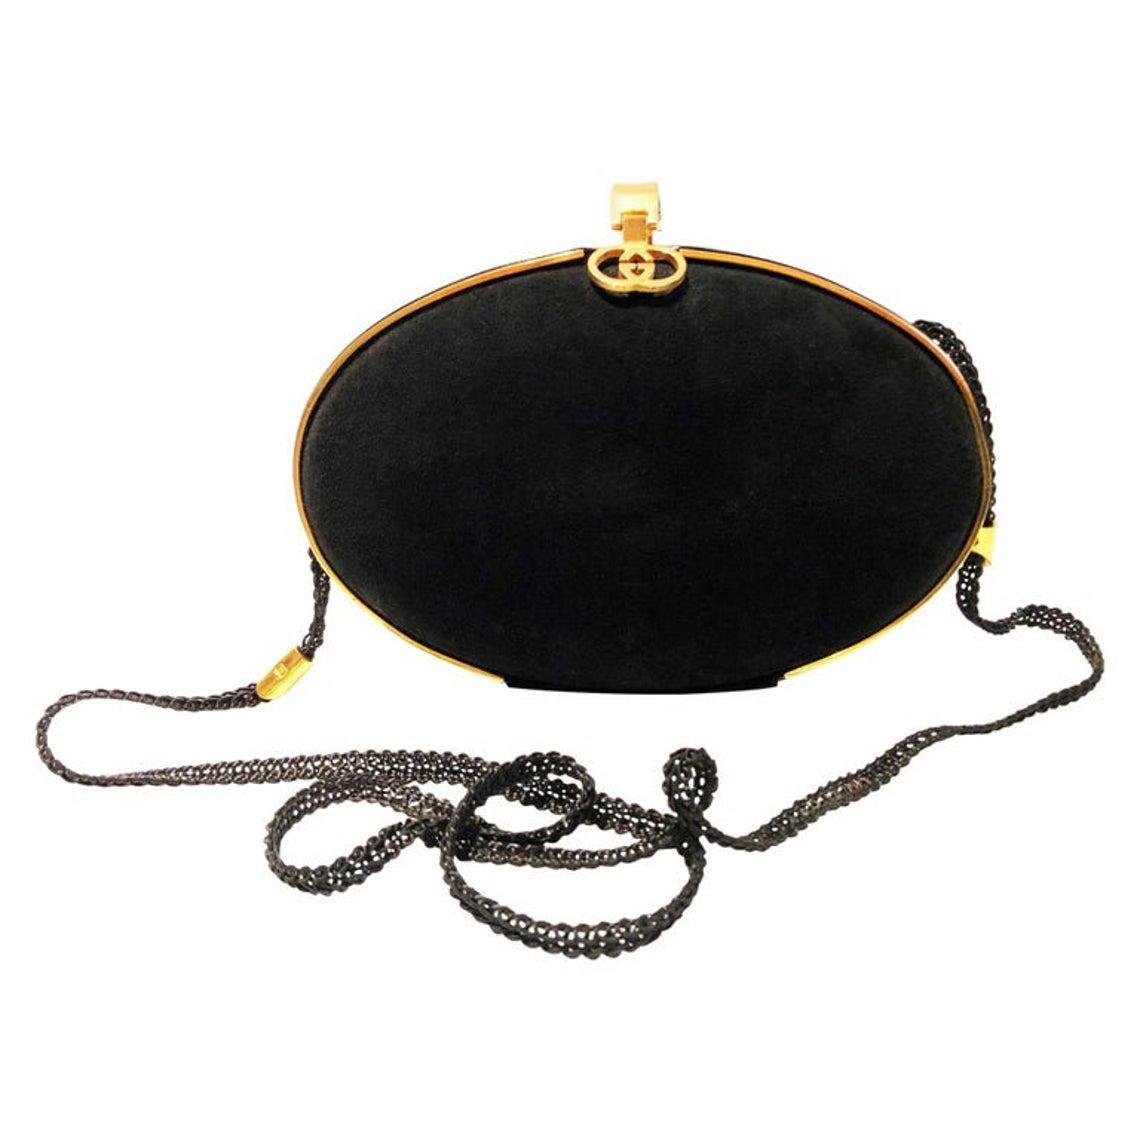 Gucci Black Vintage Gold Clutch Bag, black suede hard shell oval rounded clutch bag, Gold edge trim and GG logo and clip clasp at top. Inside, classic GG printed fabric with small card pocket and popper string shoulder strap with logo details;